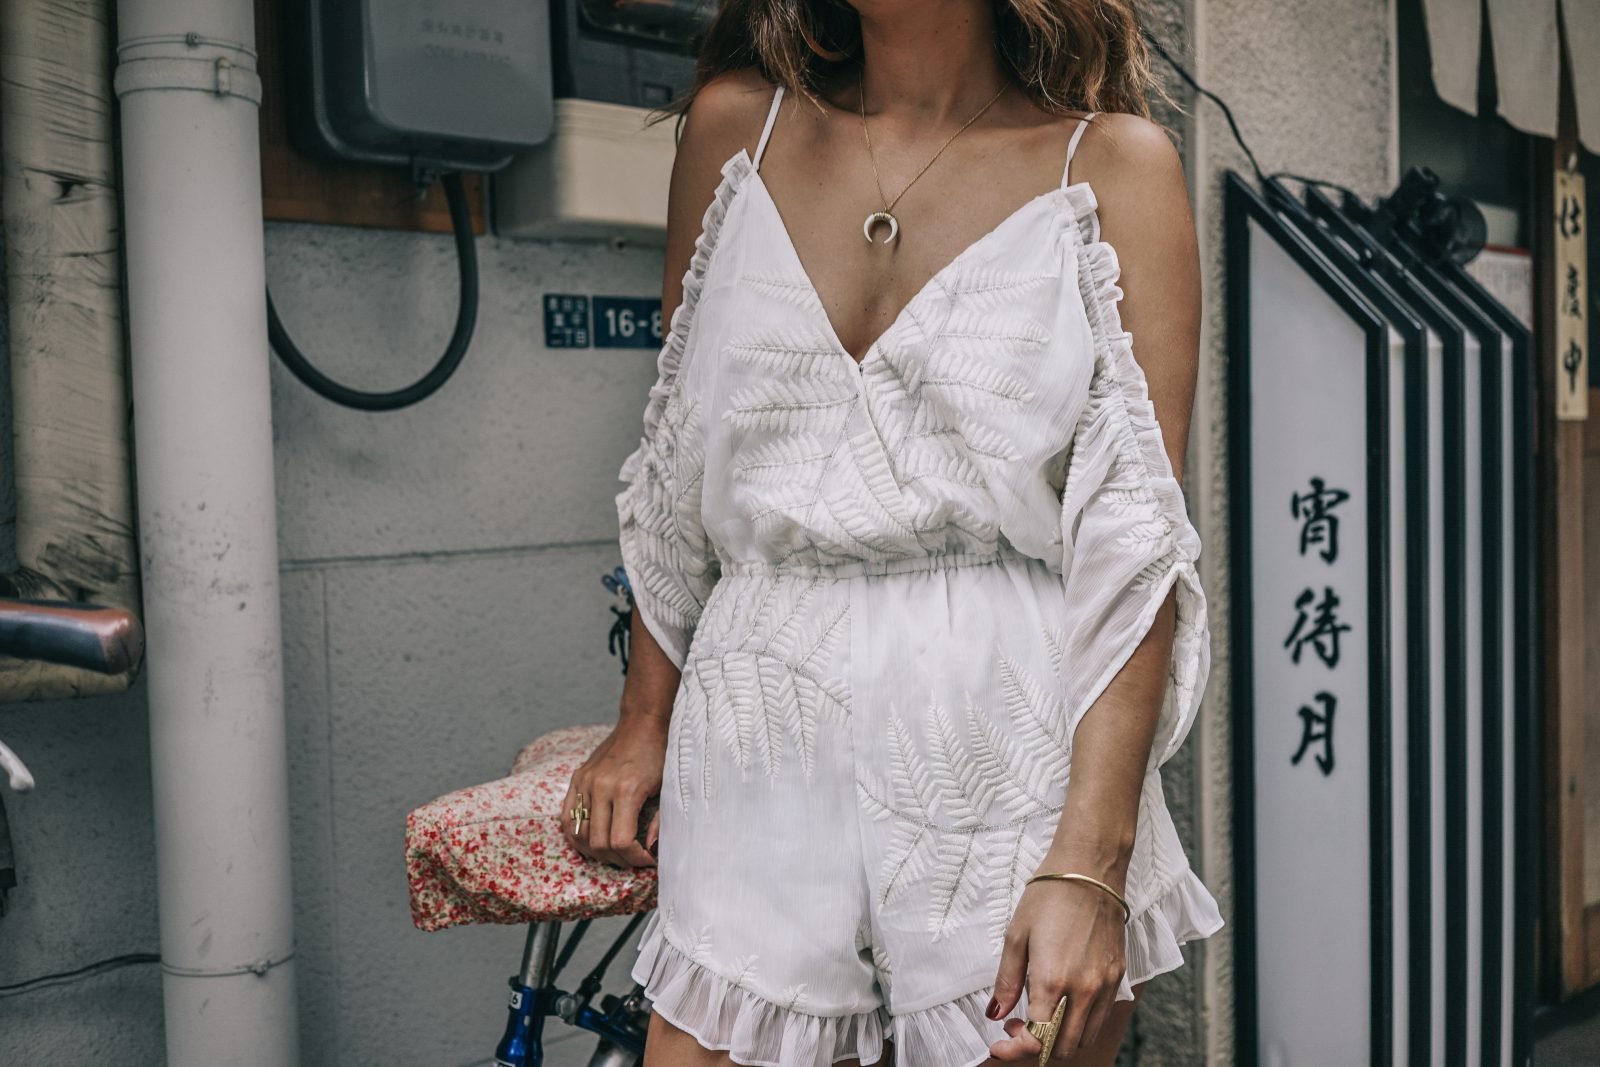 tokyo_travel_guide-outfit-collage_vintage-street_style-lovers_and_friends_jumpsuit-white_outfit-espadrilles-backpack-levis_denim_jacket-akihabara-76